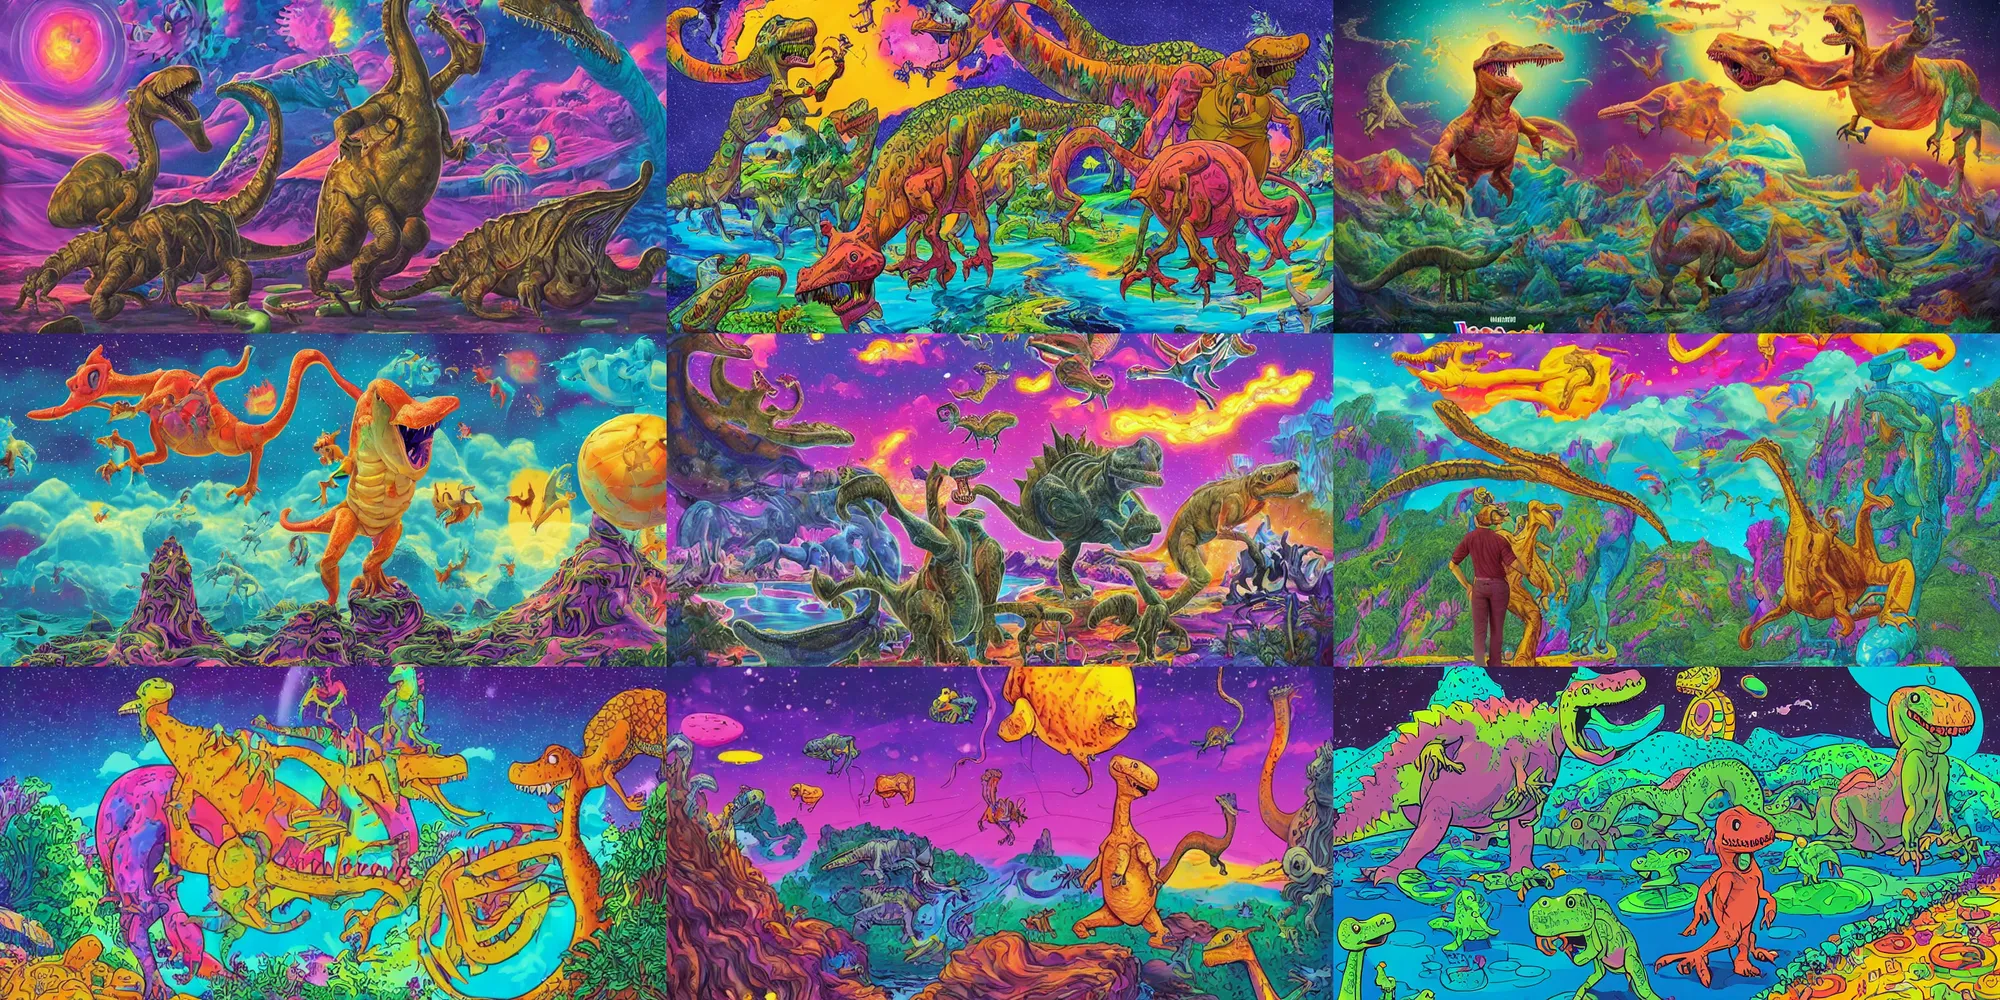 Prompt: michael garfield expectorates yet another gooey, vaguely playful confusion of backwardlooking dinosaur figure and ground with entirely too much autodidactic lisa frank and not nearly enough art school, hyperdetailed posthuman scifi landscape, extraneous ufos